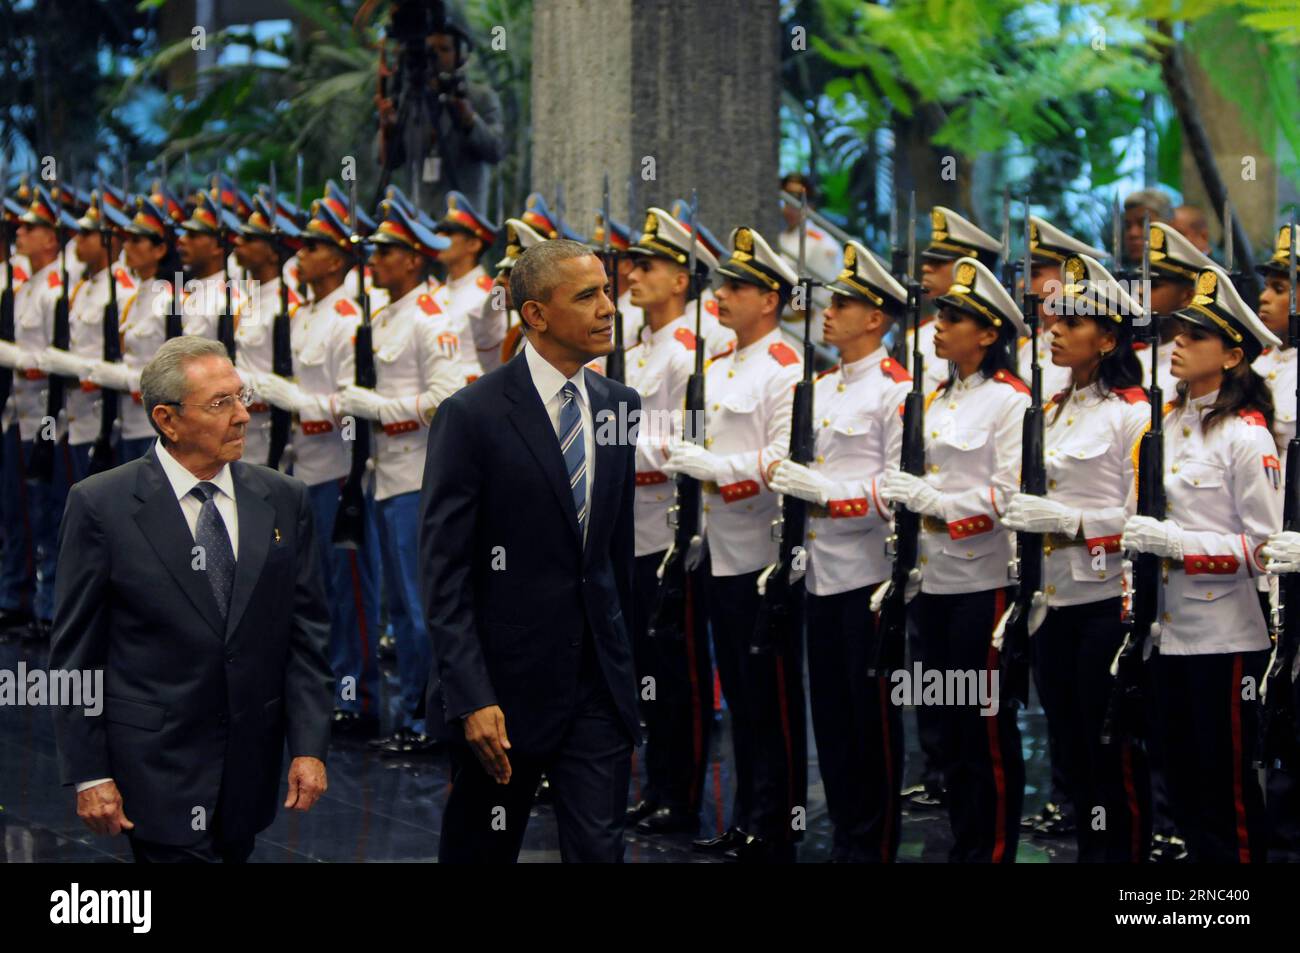 Cuba s President Raul Castro(L, front) and U.S. President Barack Obama(R, front), inspect the guard of honour at Palace of the Revolution, in Havana, capital of Cuba on March 21, 2016. Barack Obama on Monday paid tribute to Cuban national hero Jose Marti in Havana, starting the official program of his historic visit to Cuba to strengthen the approach between the two countries. ) (jp) (ah) CUBA-HAVANA-U.S.-PRESIDENT-MEETING VladimirxMolina/PrensaxLatina PUBLICATIONxNOTxINxCHN   Cuba S President Raul Castro l Front and U S President Barack Obama r Front inspect The Guard of Honour AT Palace of T Stock Photo